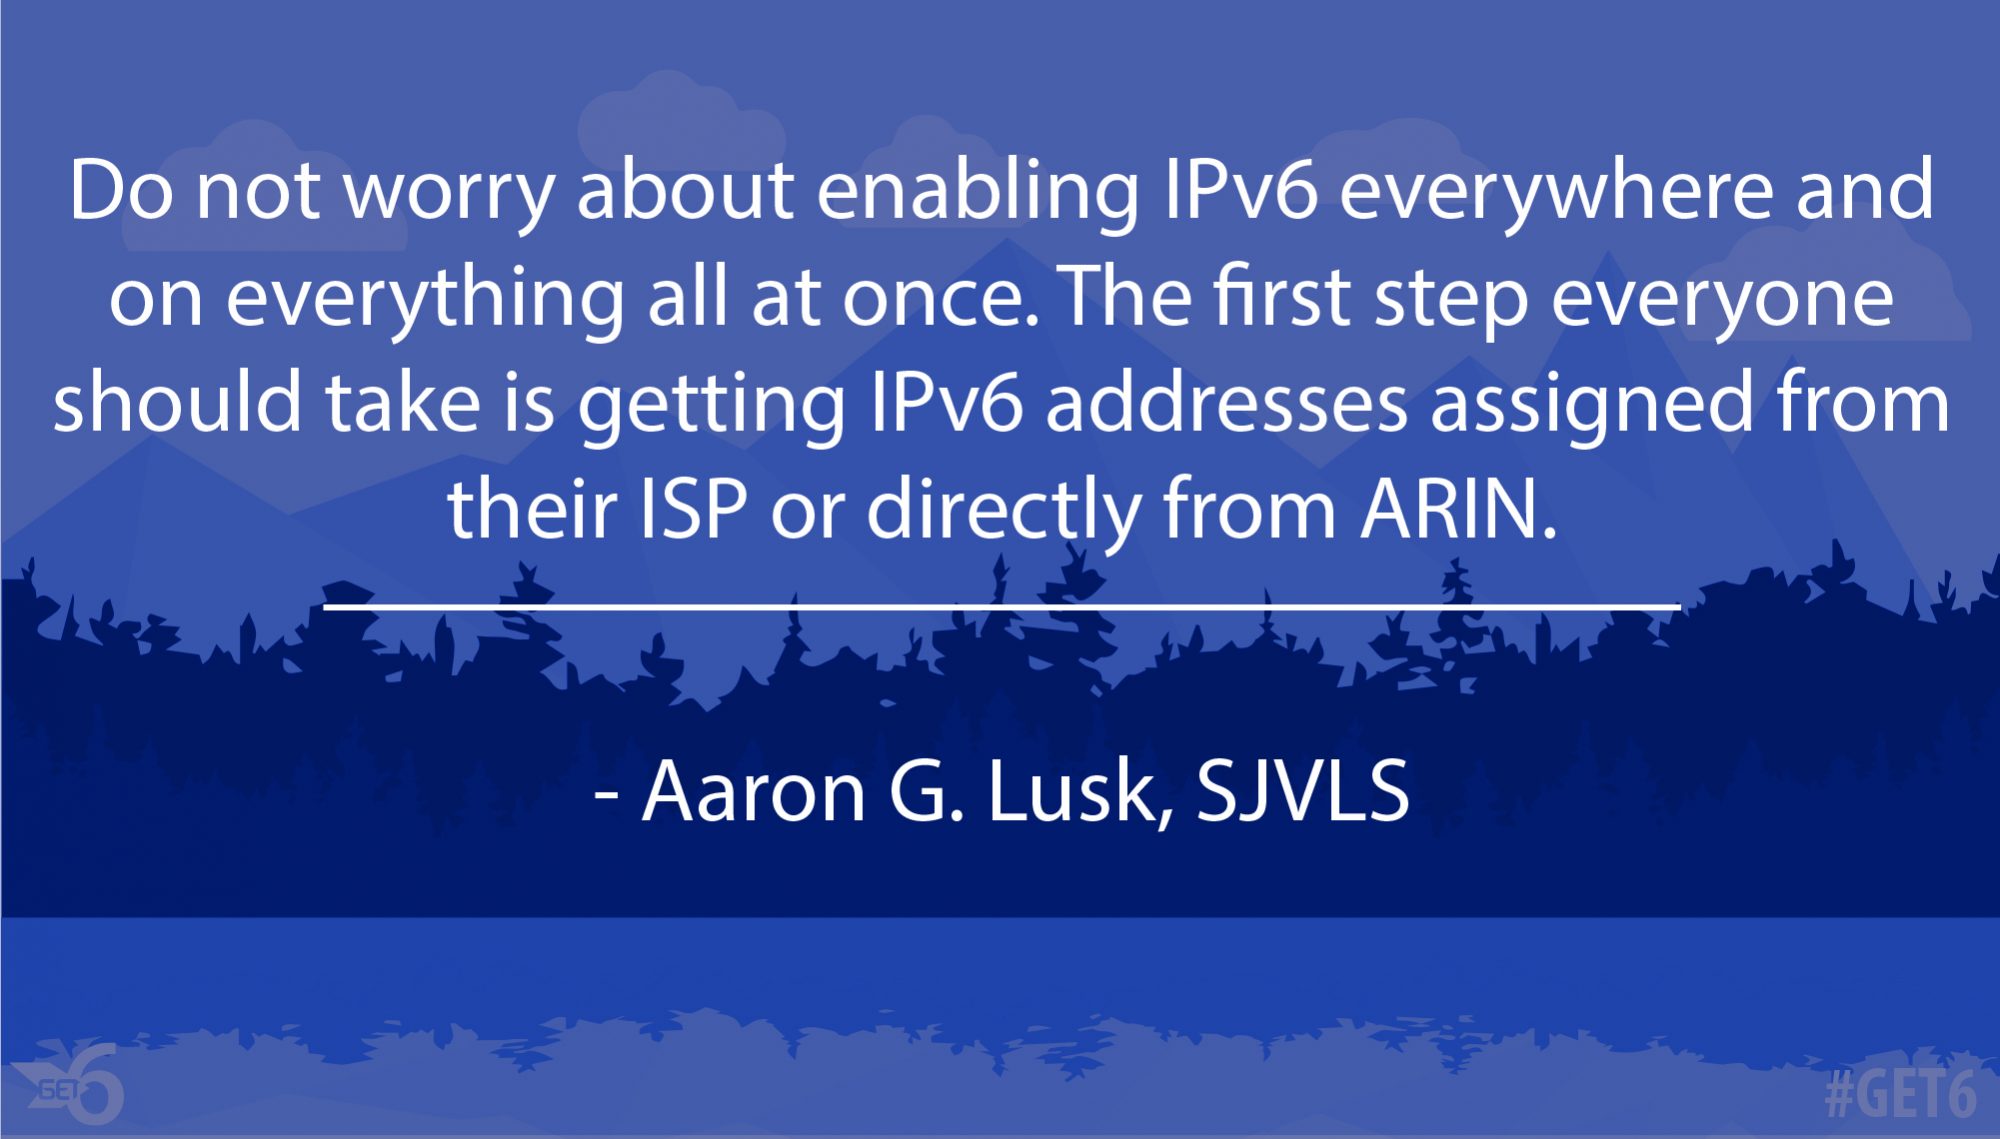 &ldquo;Do not worry about enabling IPv6 everywhere and on everything all at once.&rdquo;